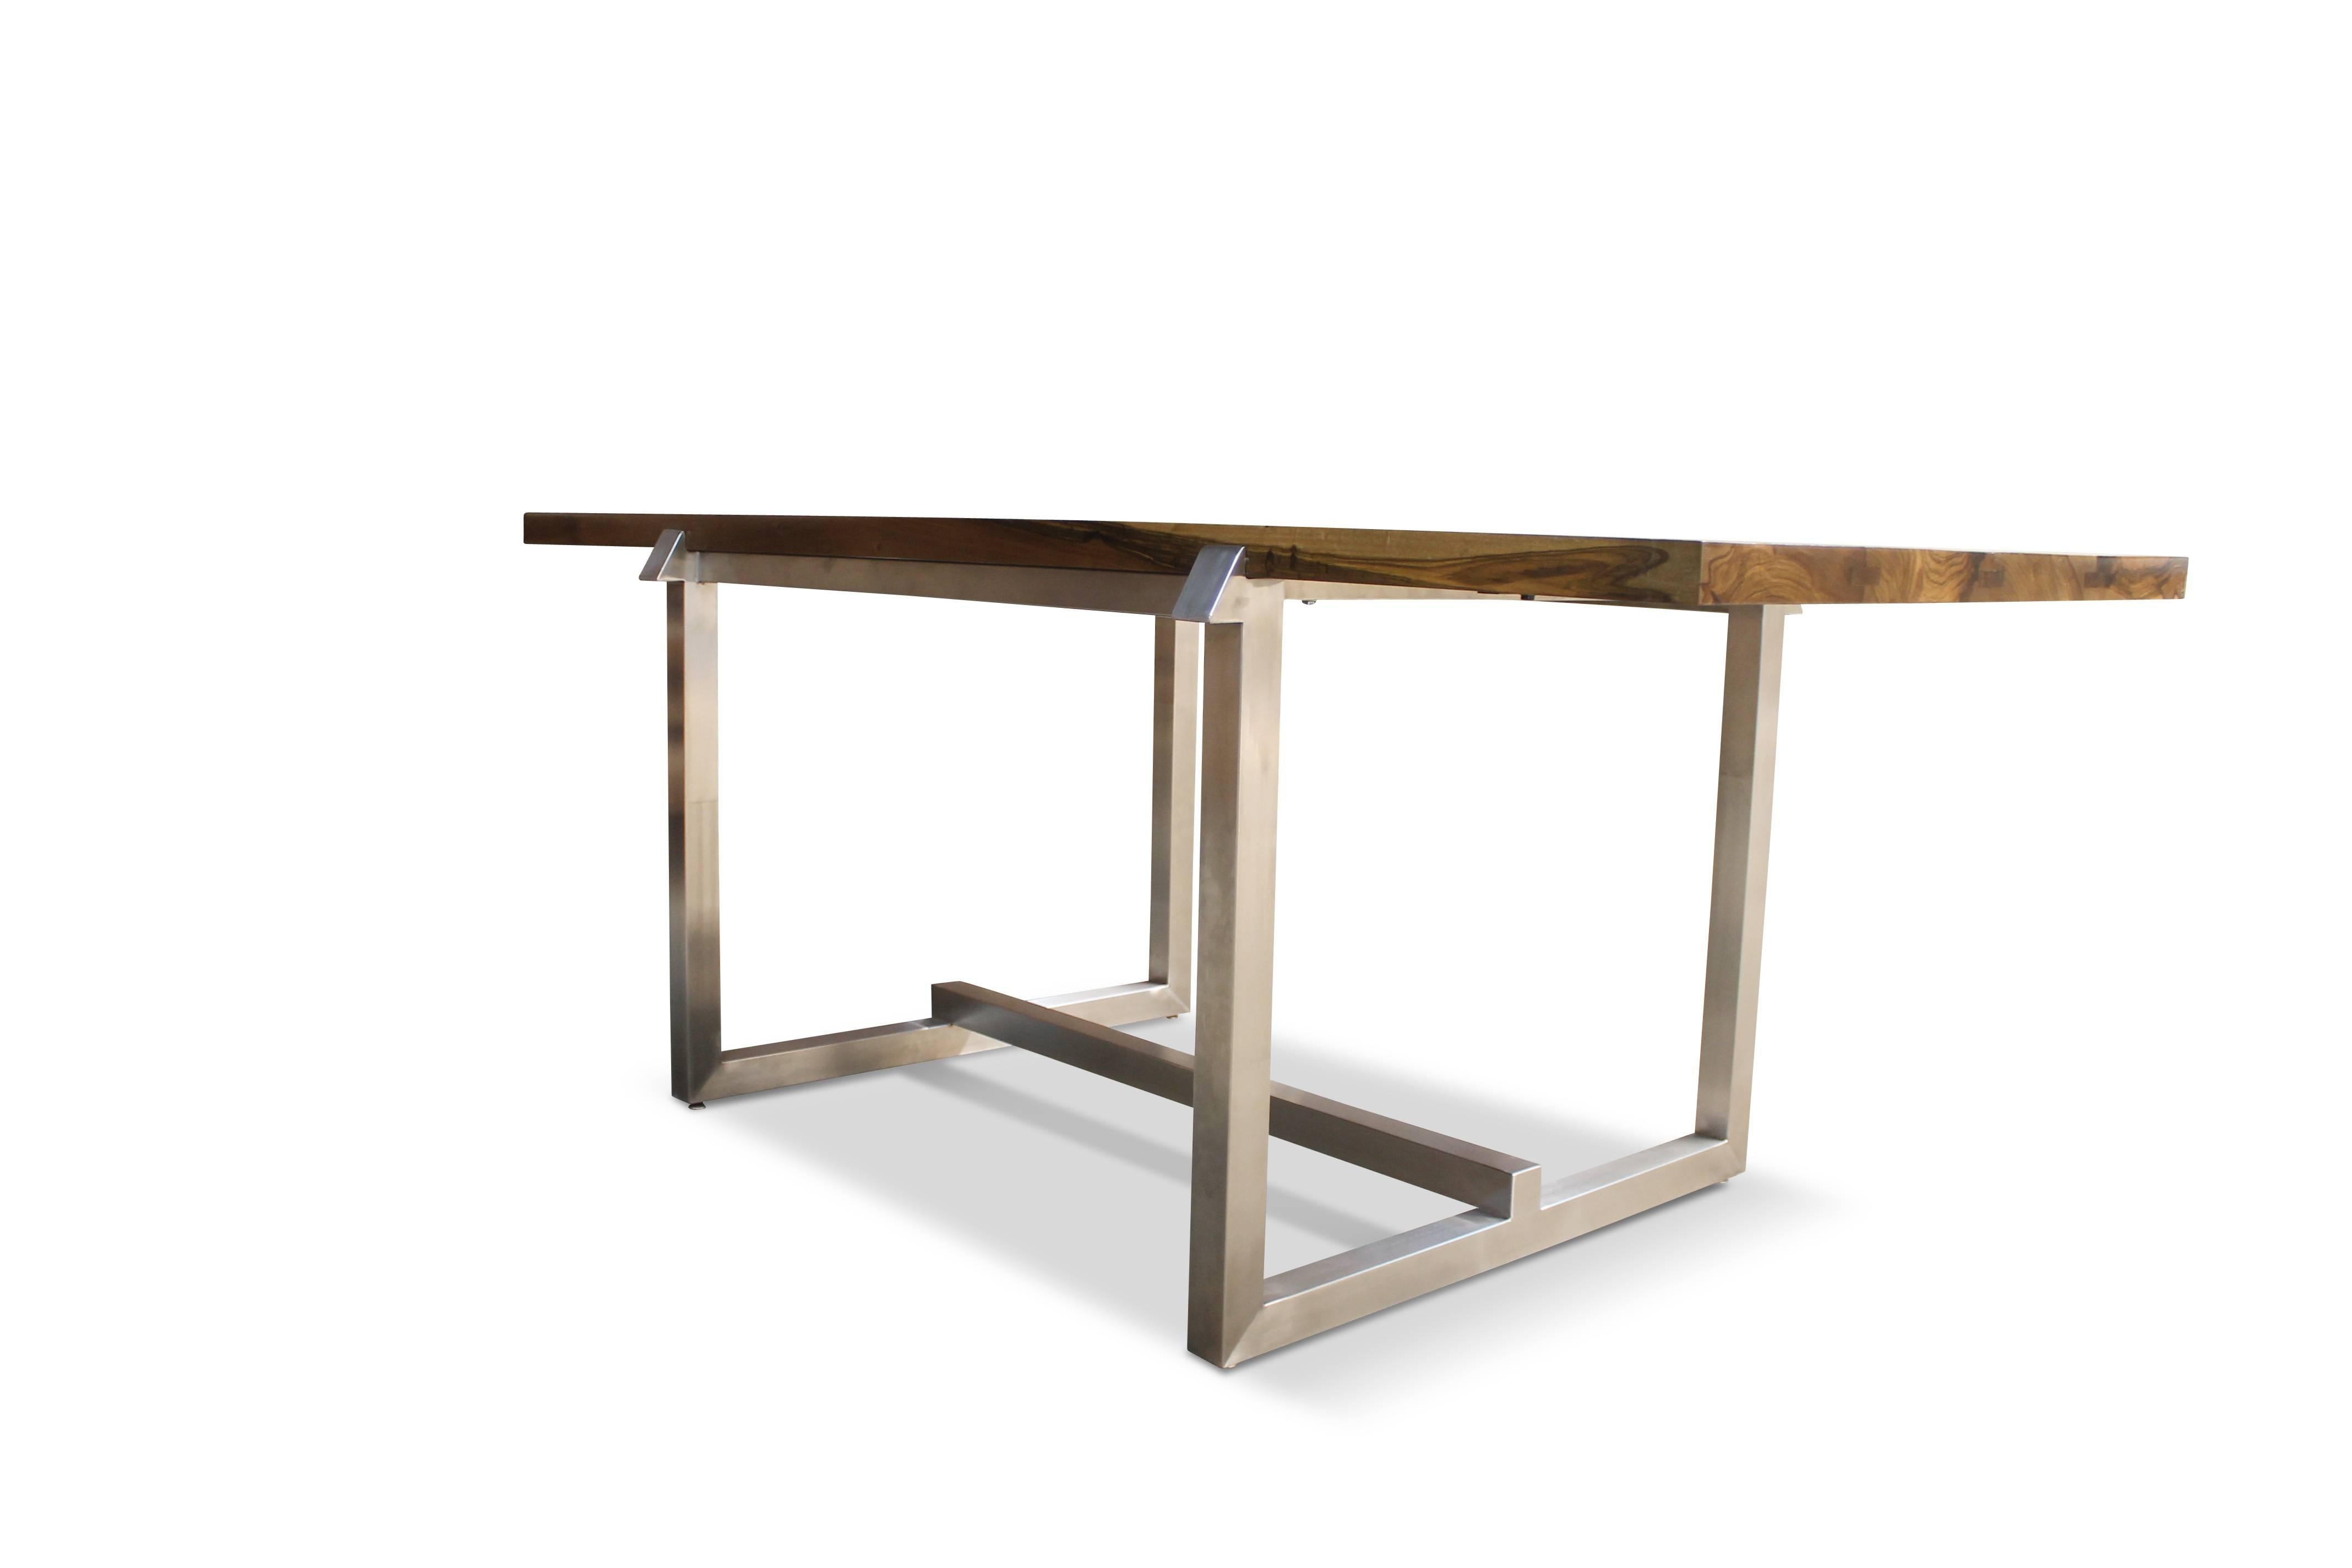 Modern Steel Framed Dining Table with Argentine Rosewood from Costantini, Donato